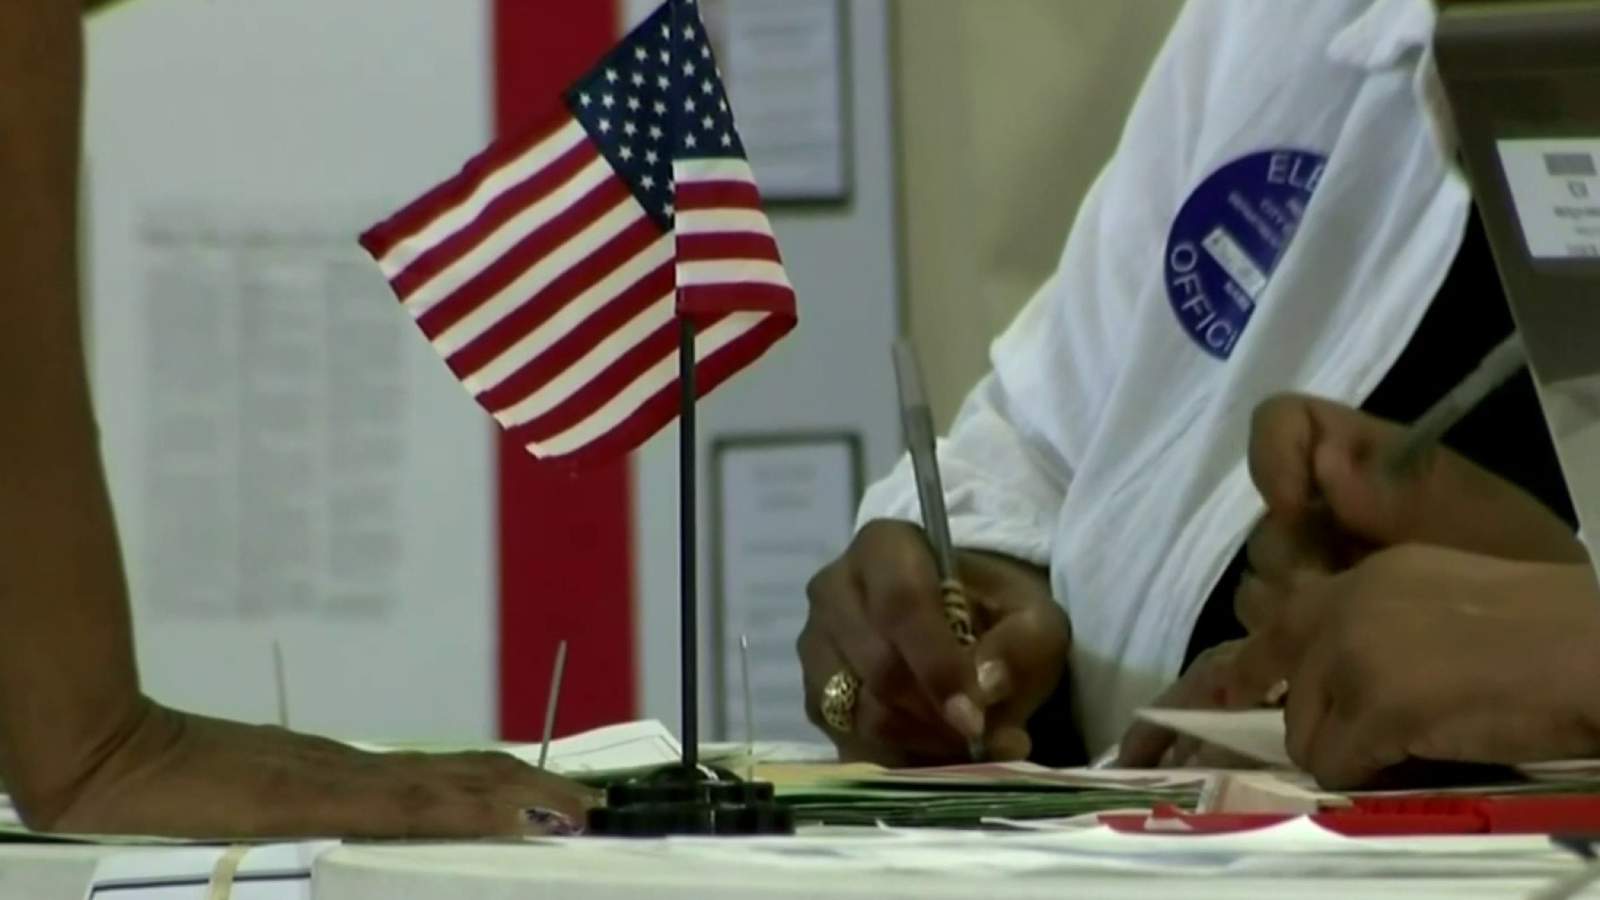 Michigan Court of Appeals to review Detroits absentee ballot precinct inaccurate count